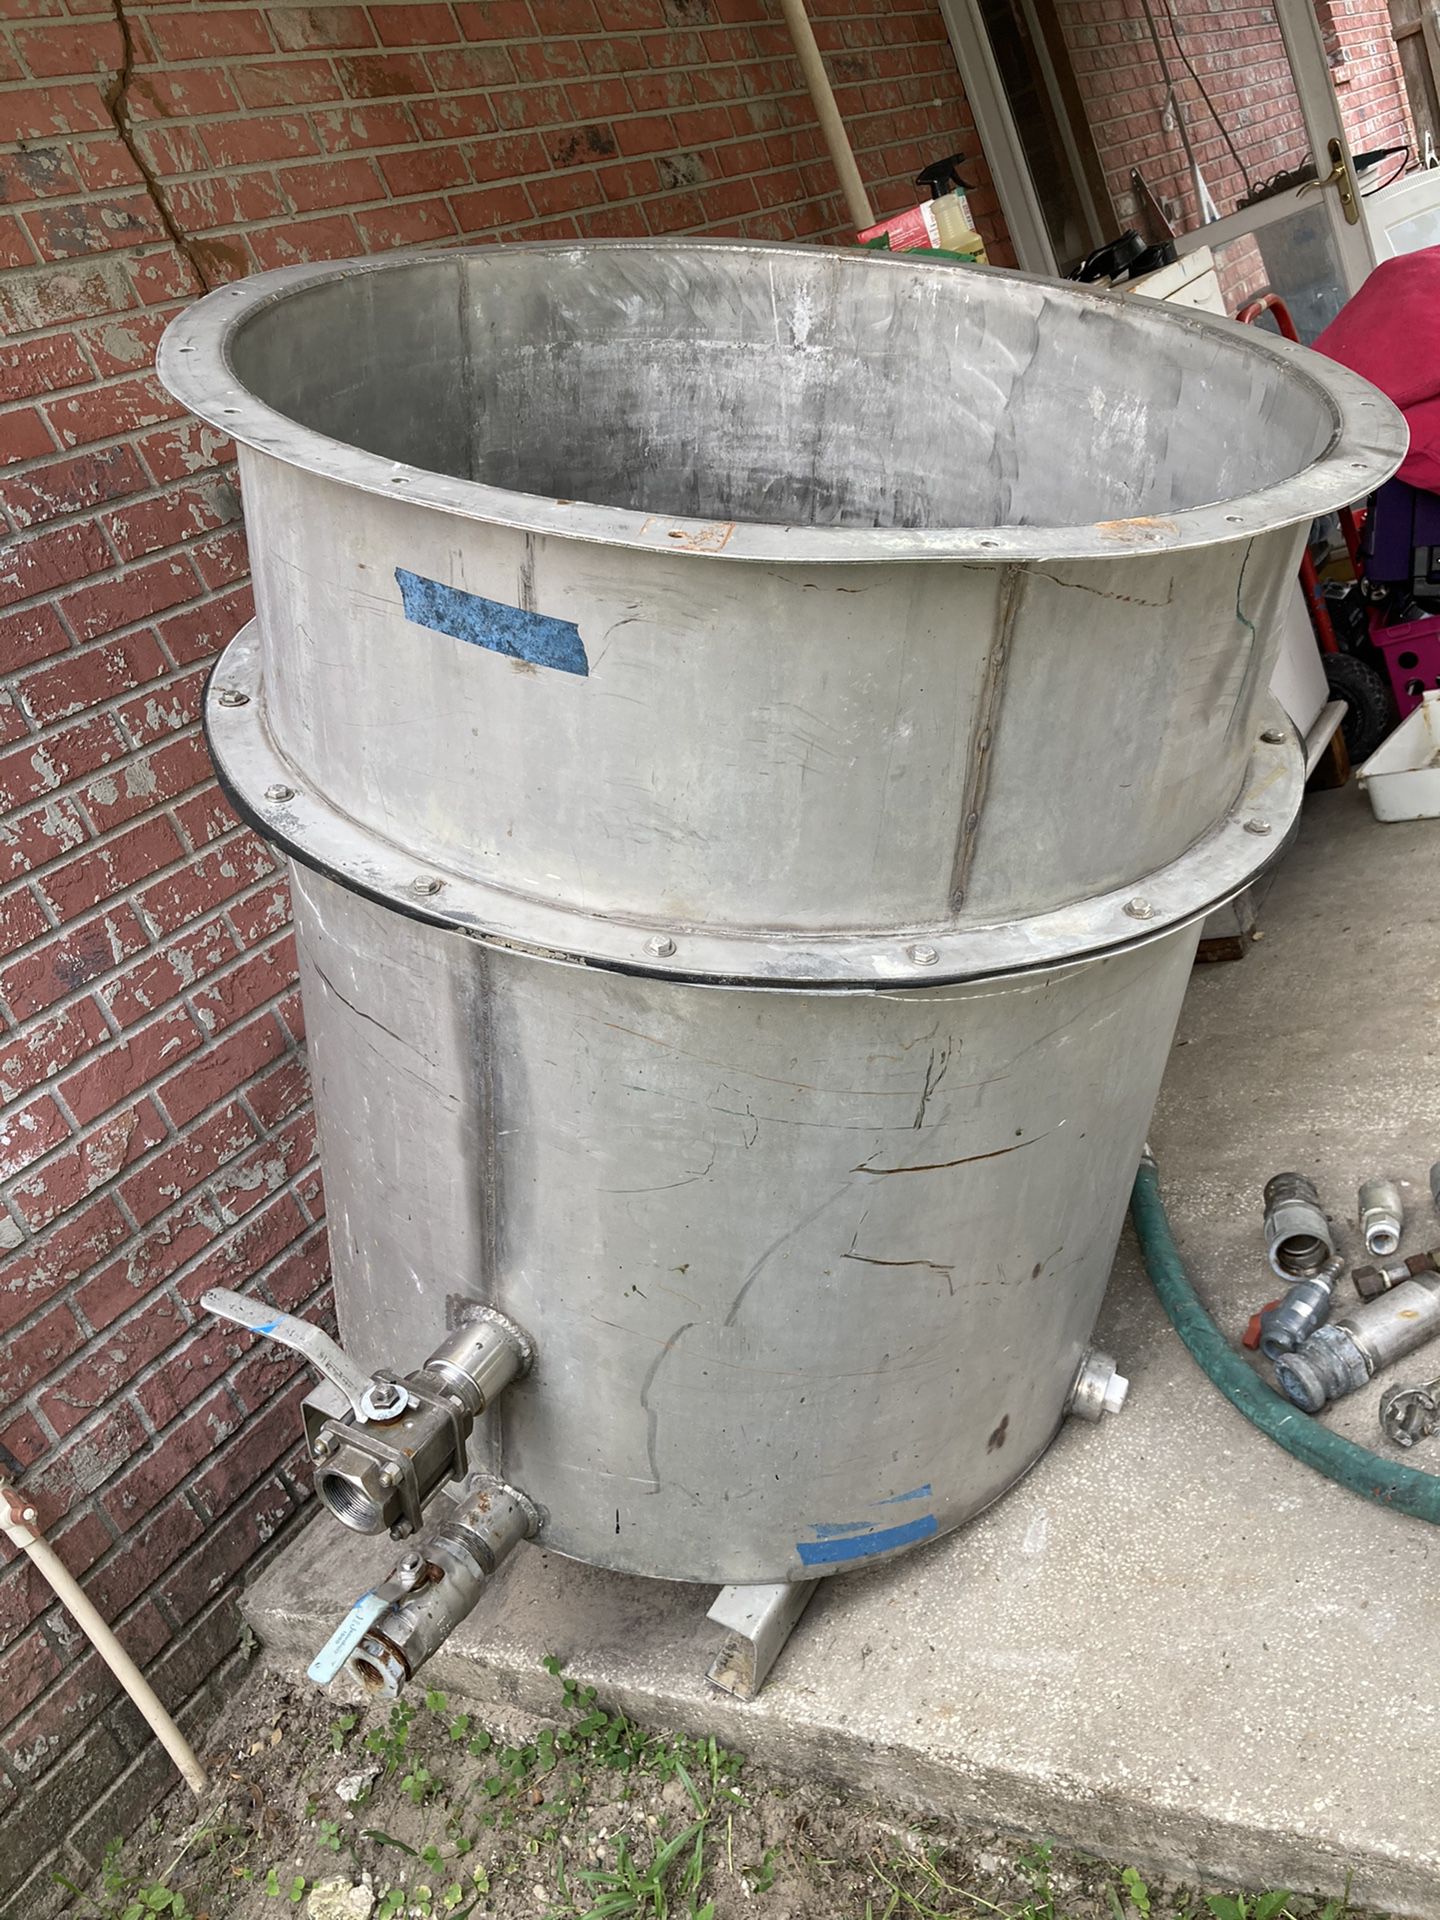 Model 150 Gallons Stainless Steel Tank, plus all the fittings and valves are too.